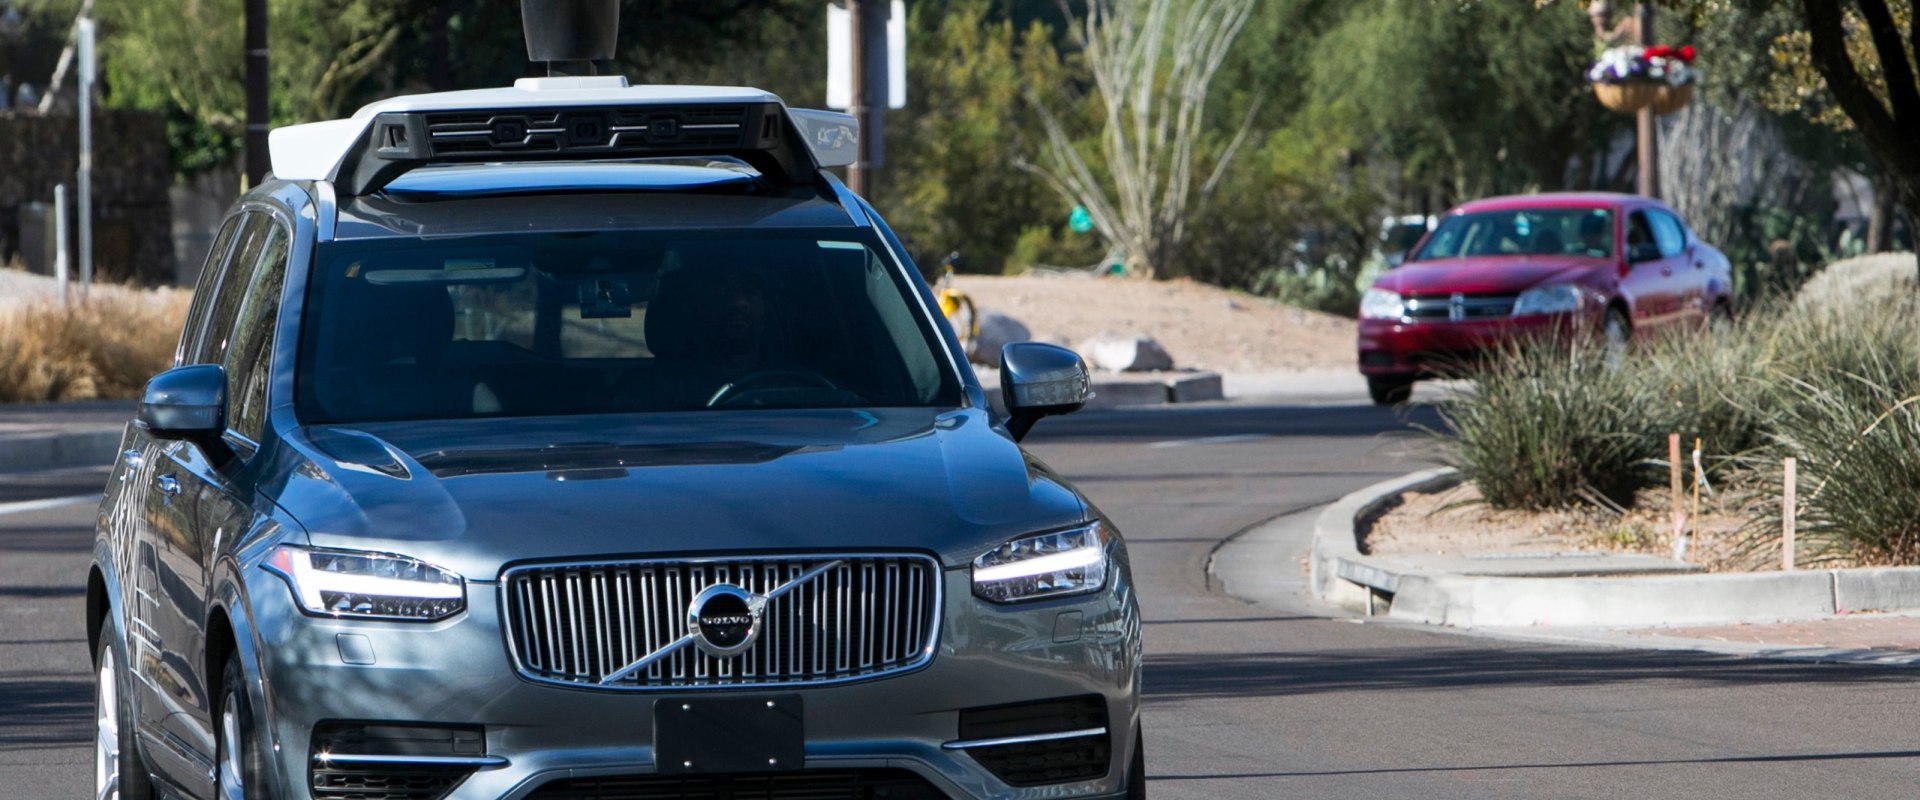 Uber Safety Standards in Arizona: Regulations and Policies